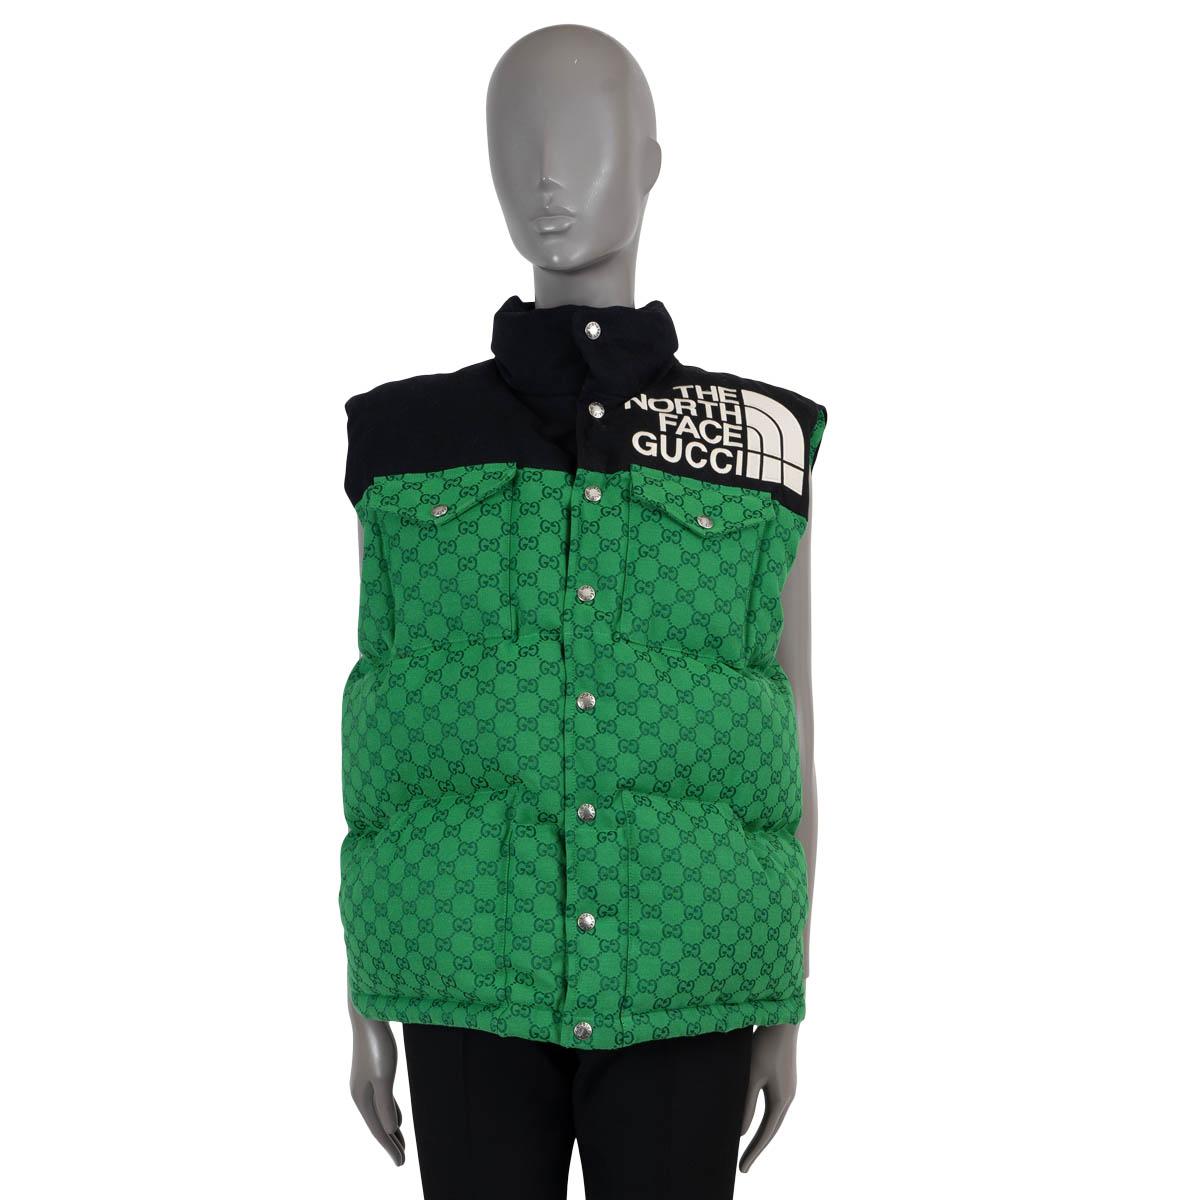 GUCCI x THE NORTH FACE green GG MONOGRAM PUFFER Vest Jacket S For Sale